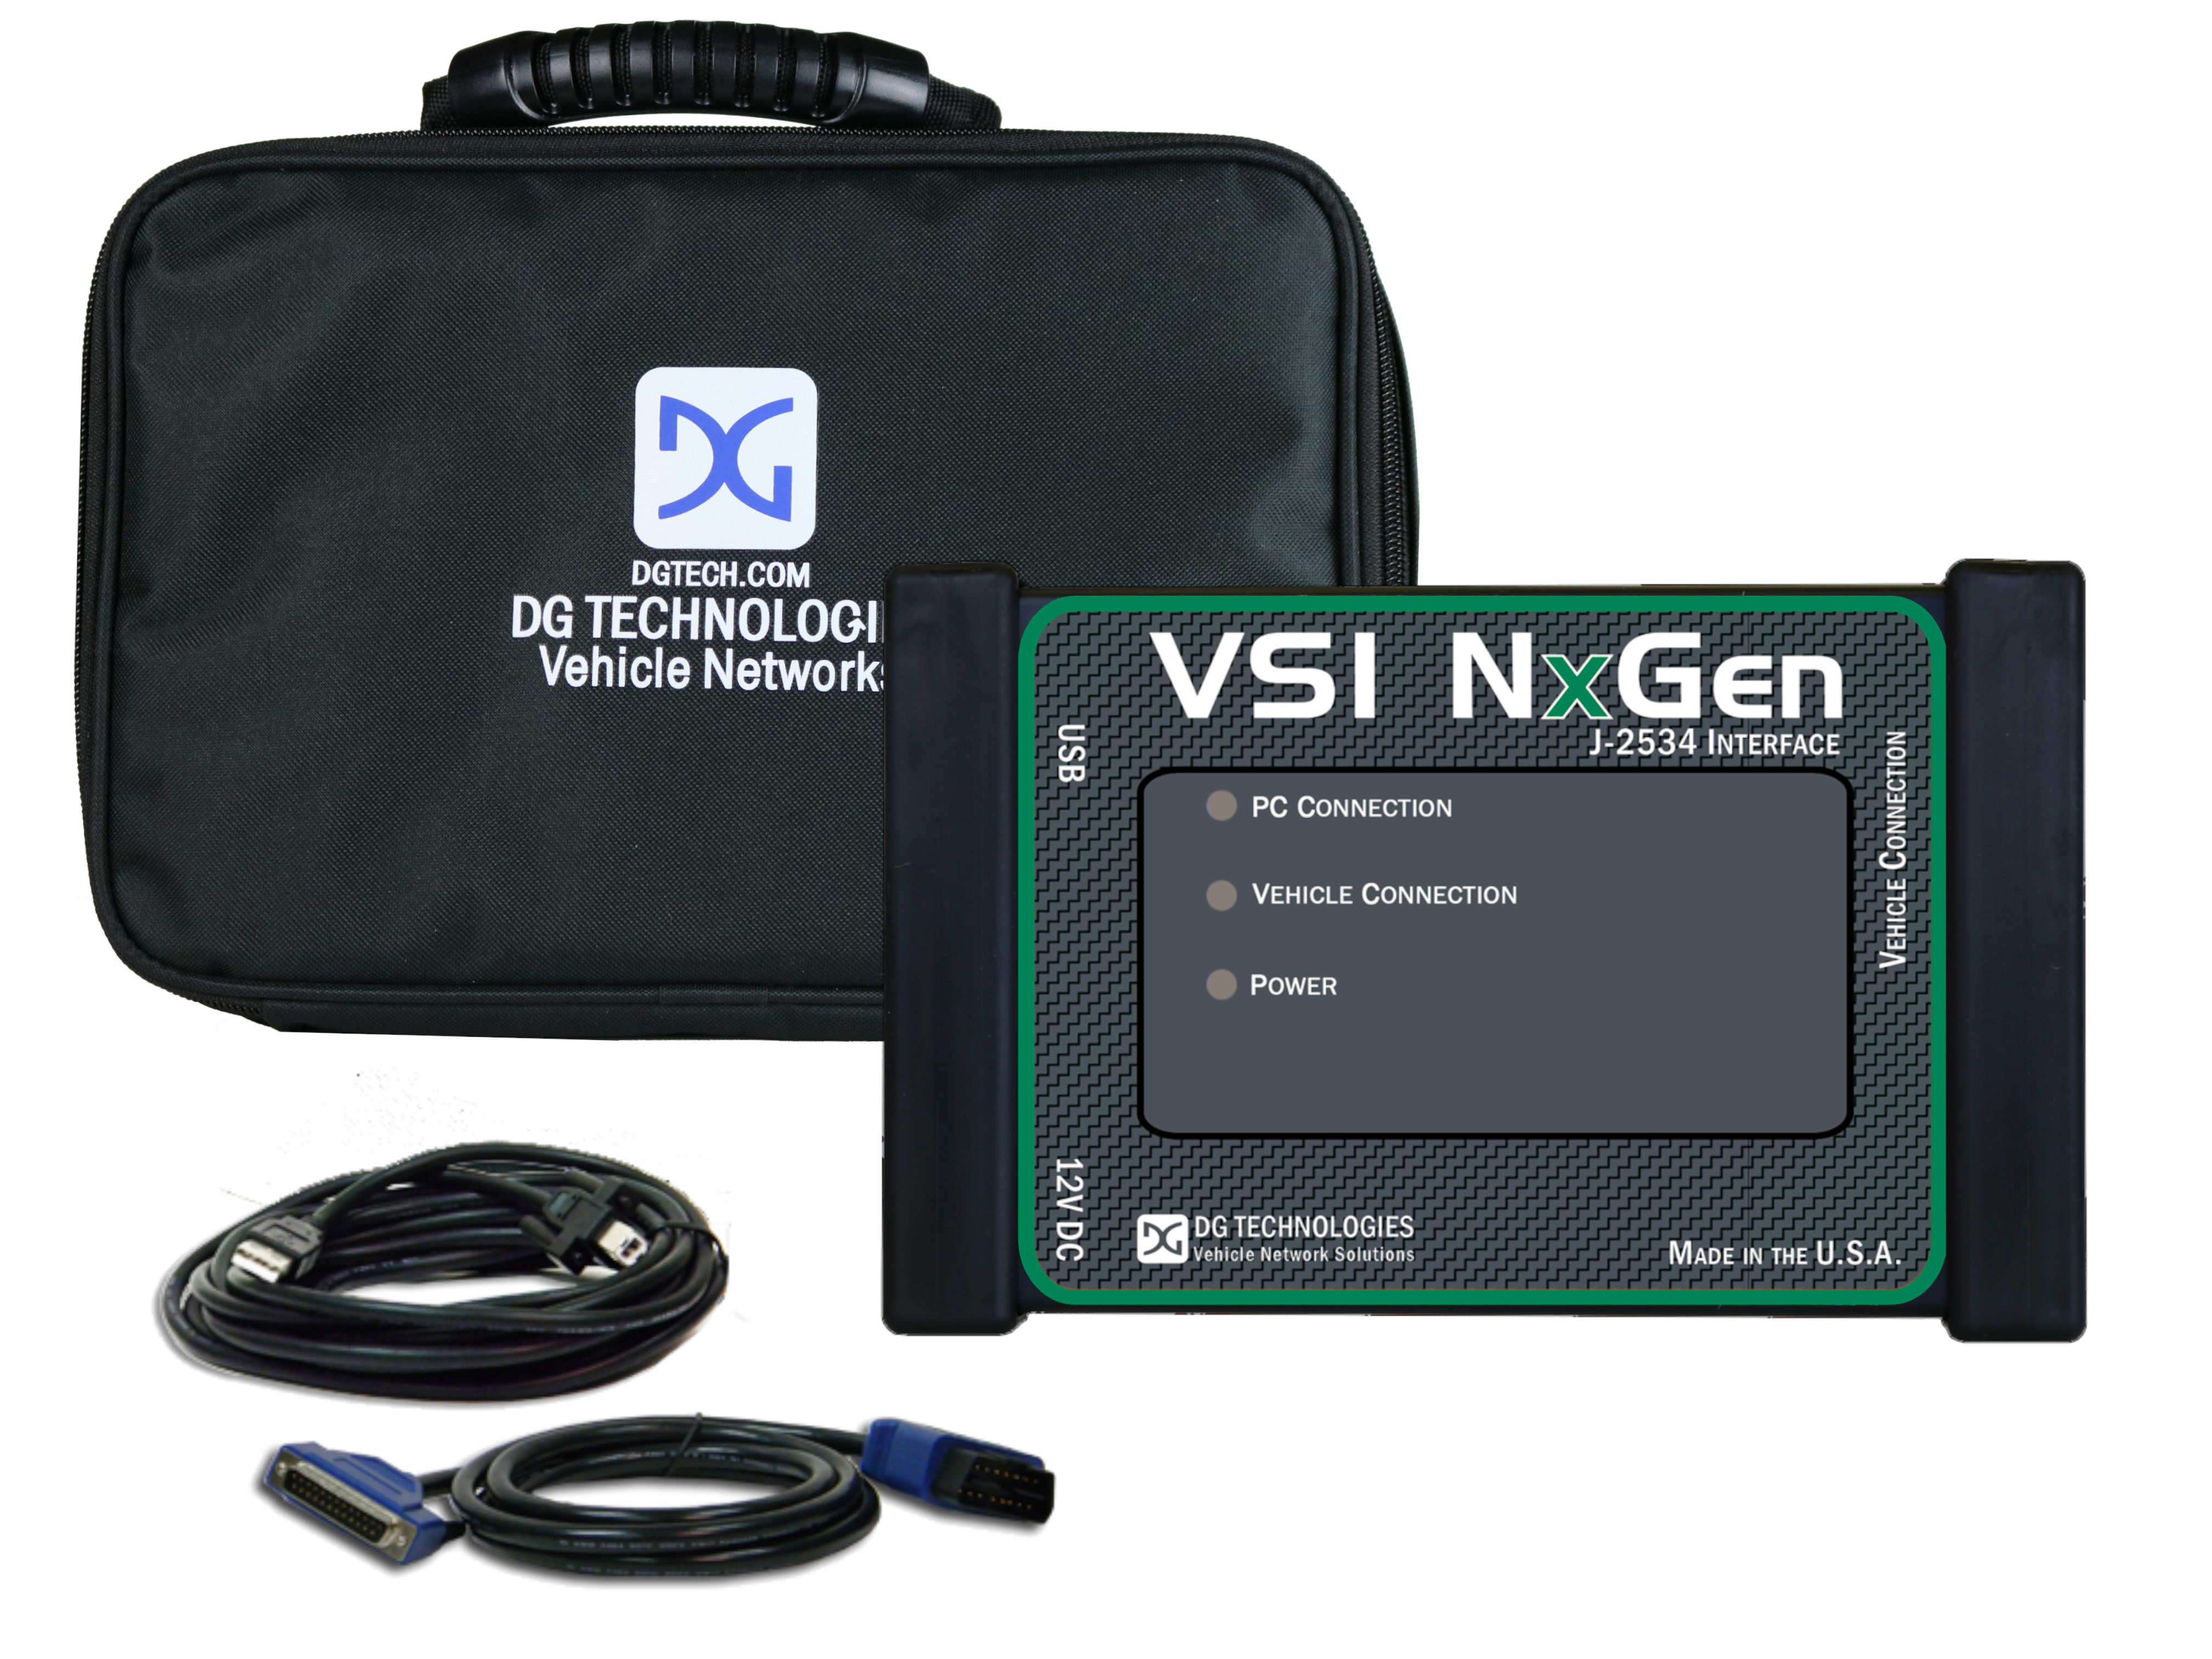 New VSI NxGen Update! Version 3.06 is Available Now!